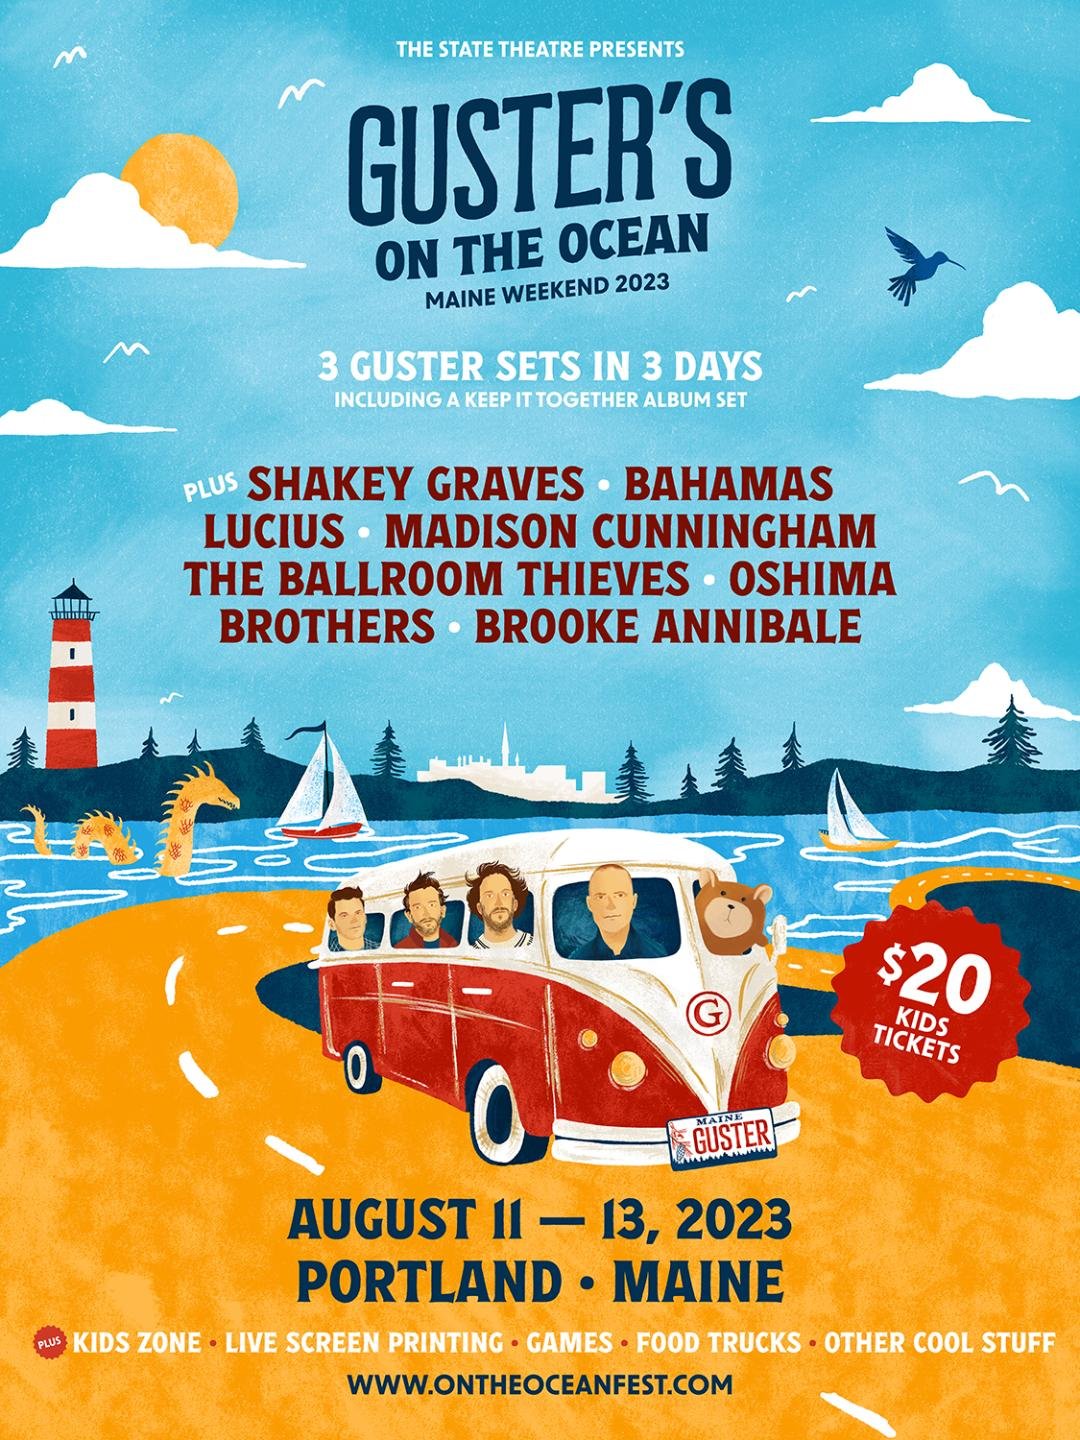 METRMAG Spotlight On: Guster’s On The Ocean Weekend Expands To Three Days! (Portland, ME.)